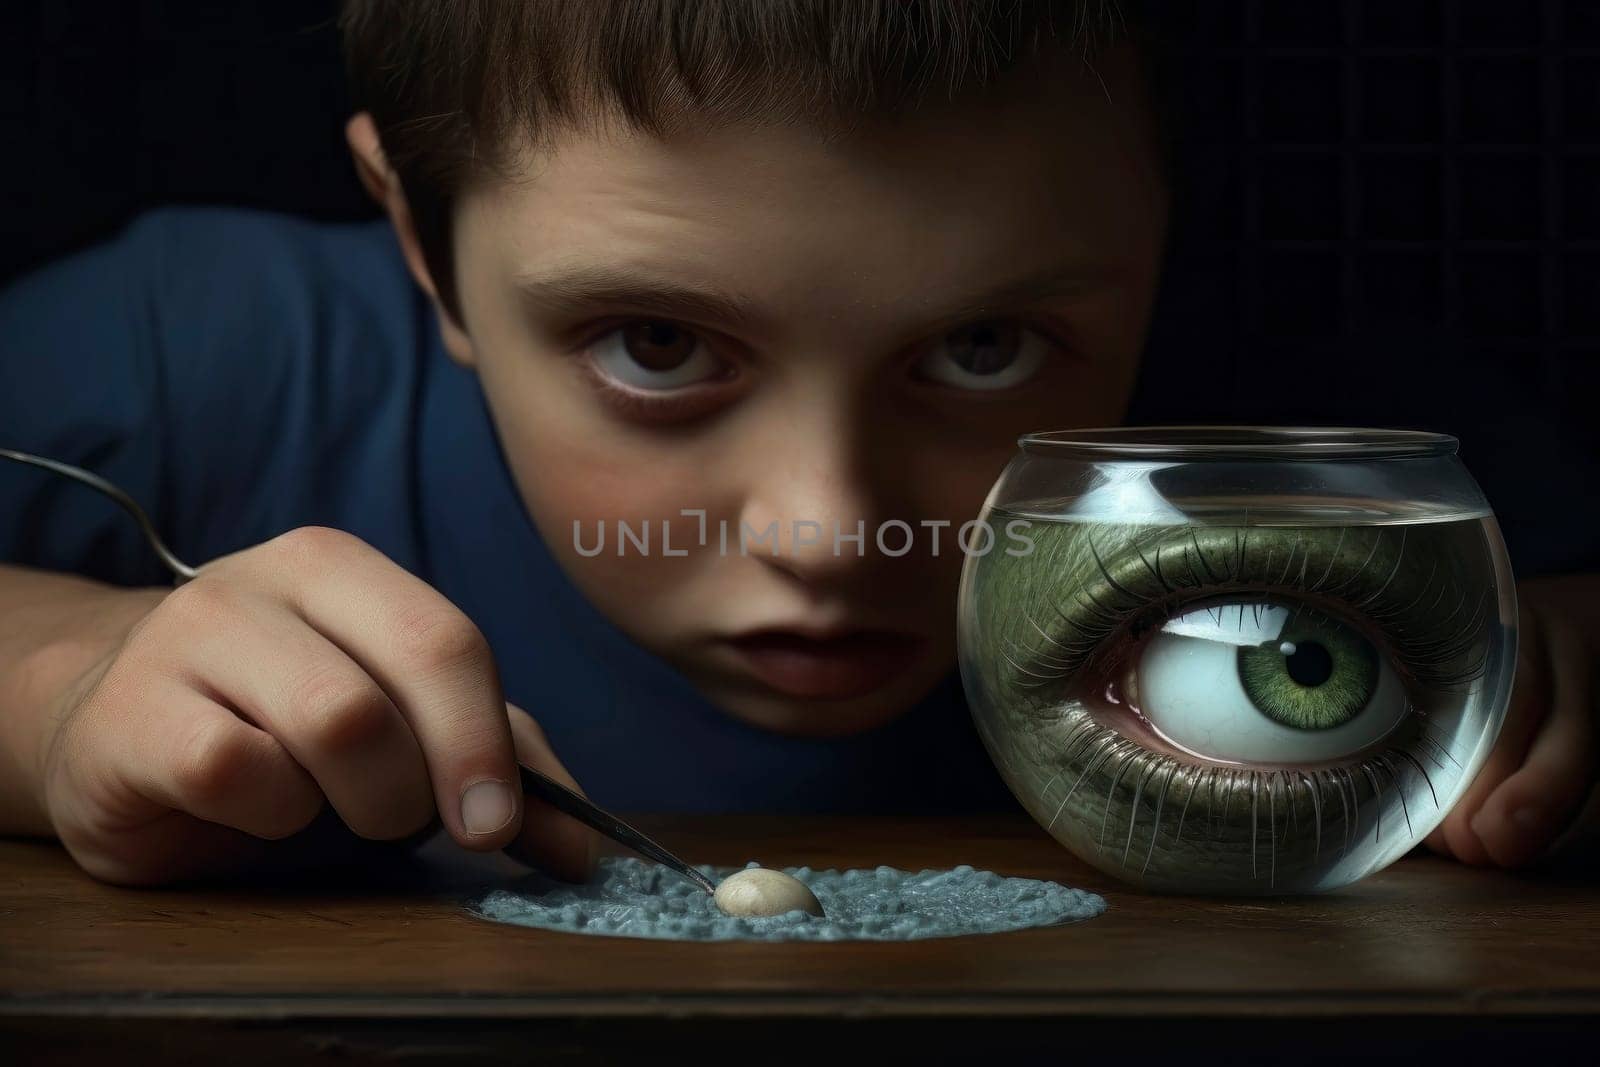 An intriguing image capturing a child with a captivating eye, filled with curiosity and observation.